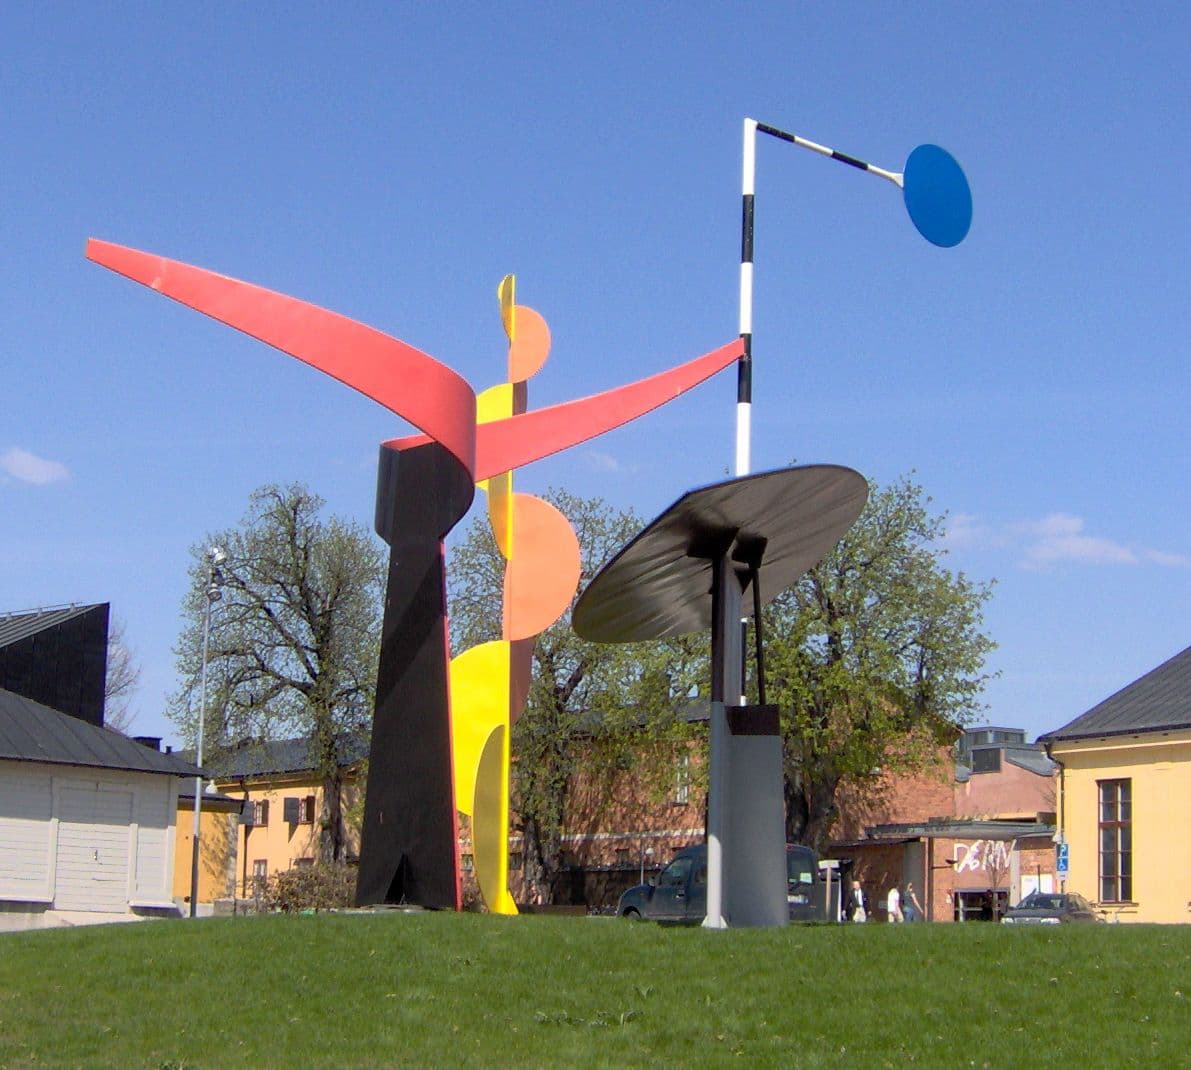 Fig. 3 - Alexander Calder, The four elements, outside area of ​​the Stockholm Museum of Modern Art, Sweden, 2006. Photo: No machine-readable author provided. Kalle1~commonswiki assumed (based on copyright claims)., Public domain, via Wikimedia Commons.